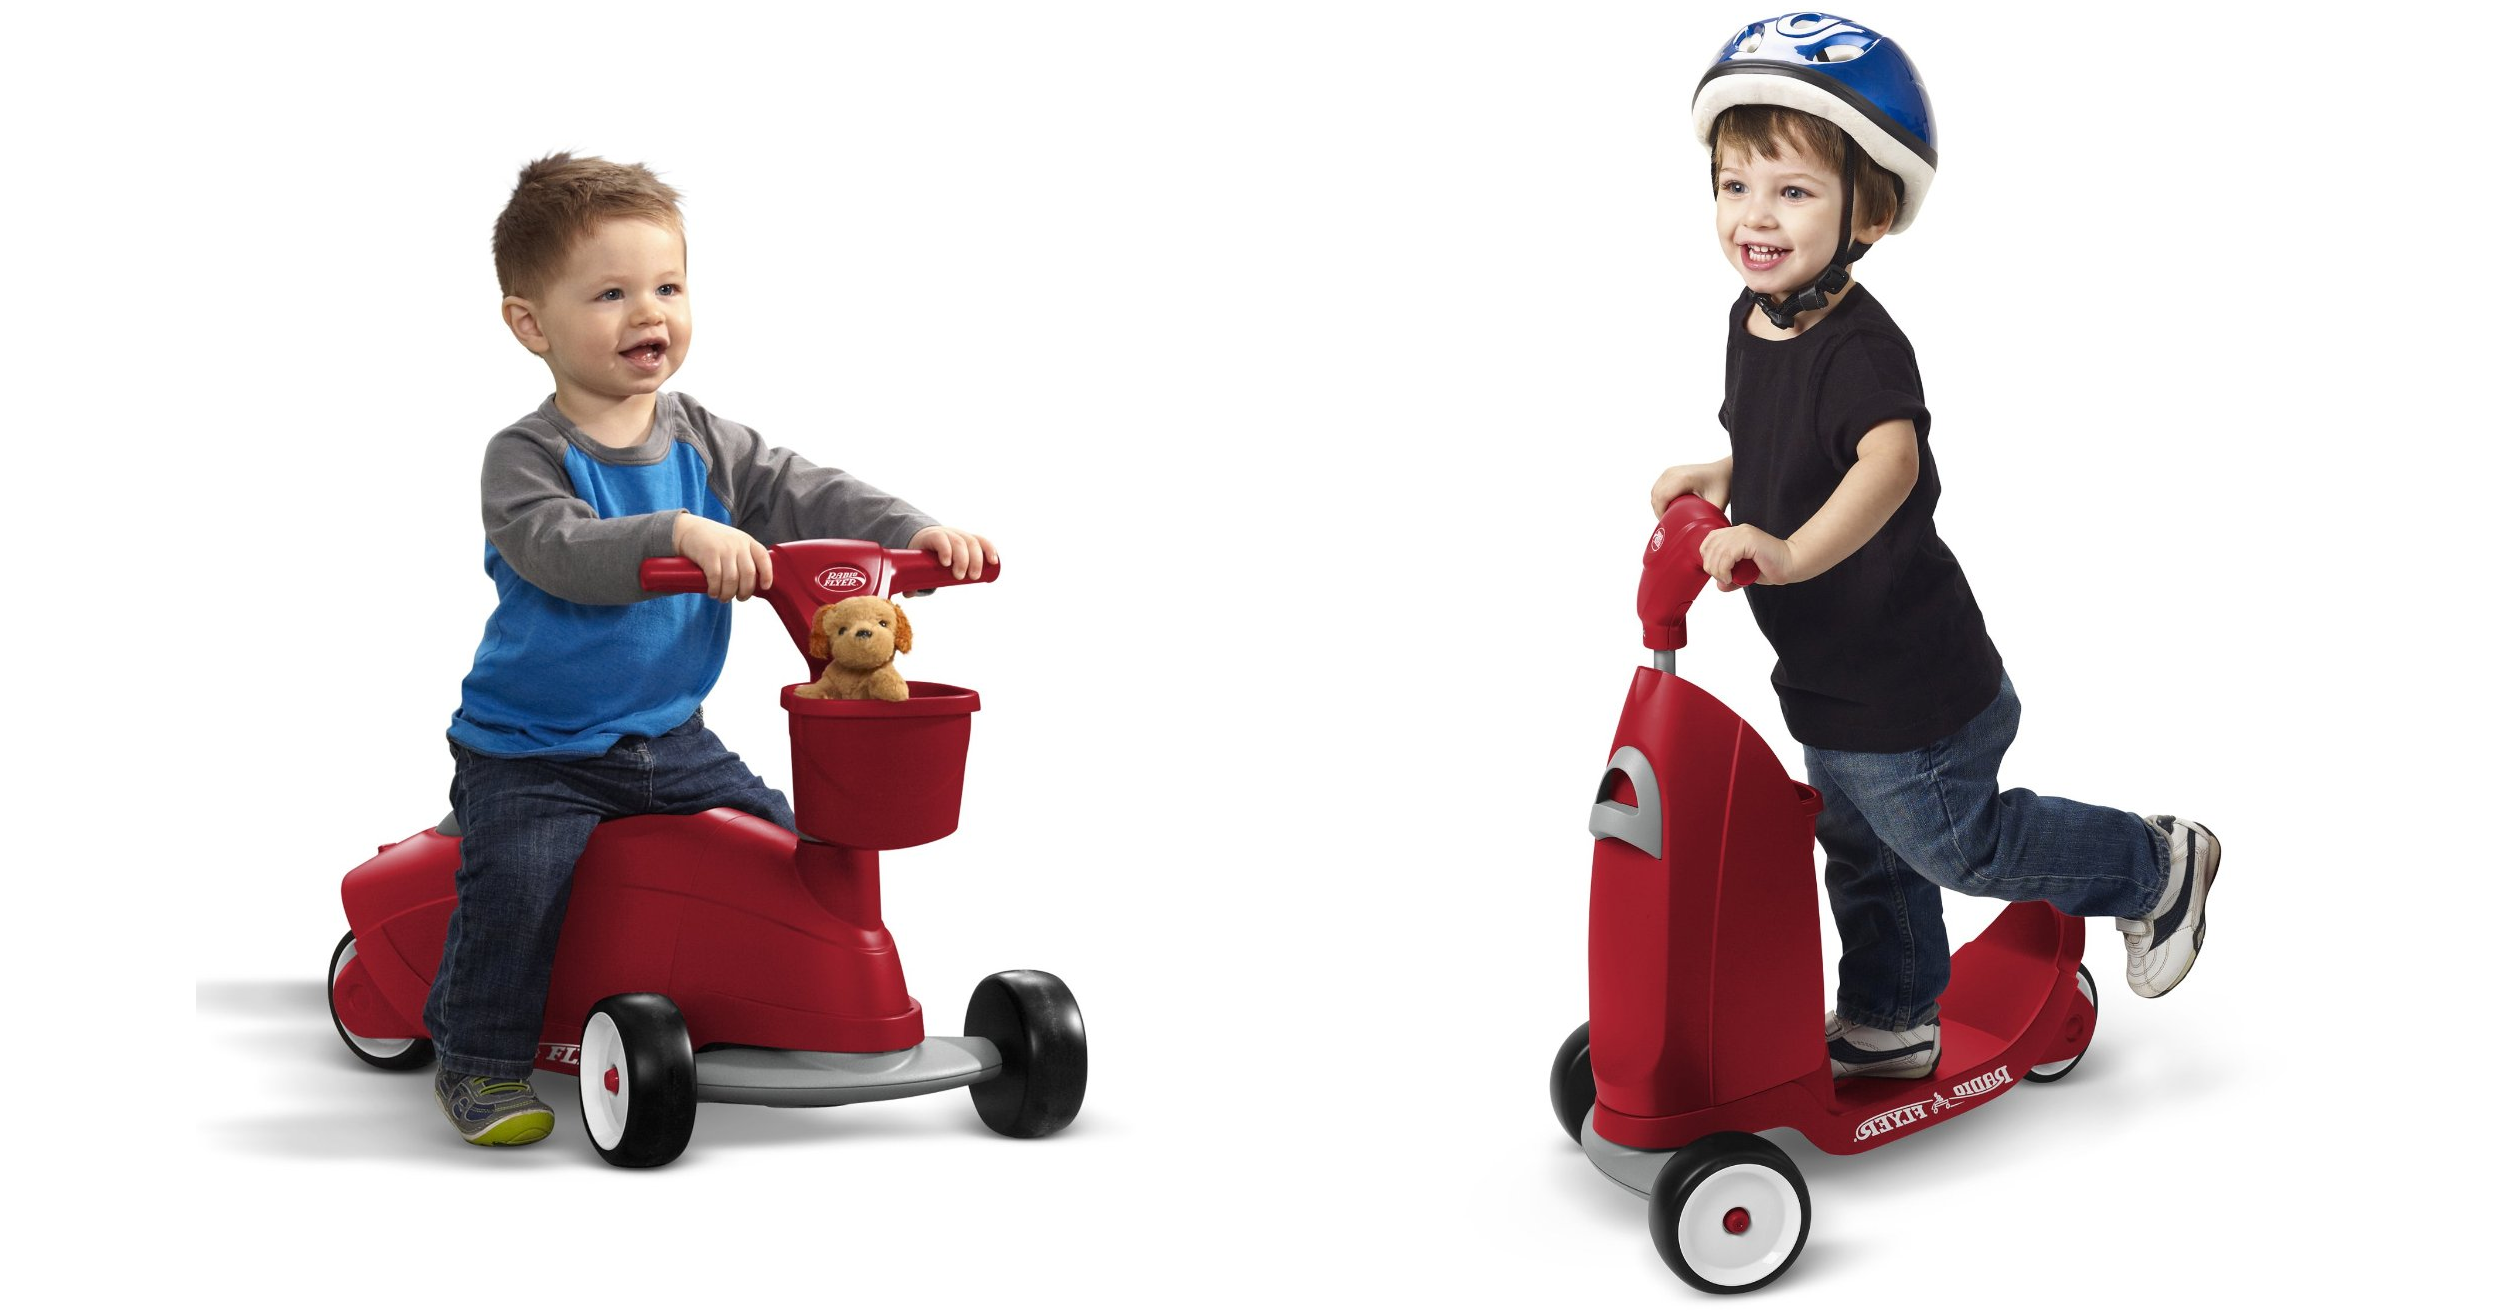 Radio Flyer Ride 2 Glide Ride On Toy ONLY $27.31 on Amazon!